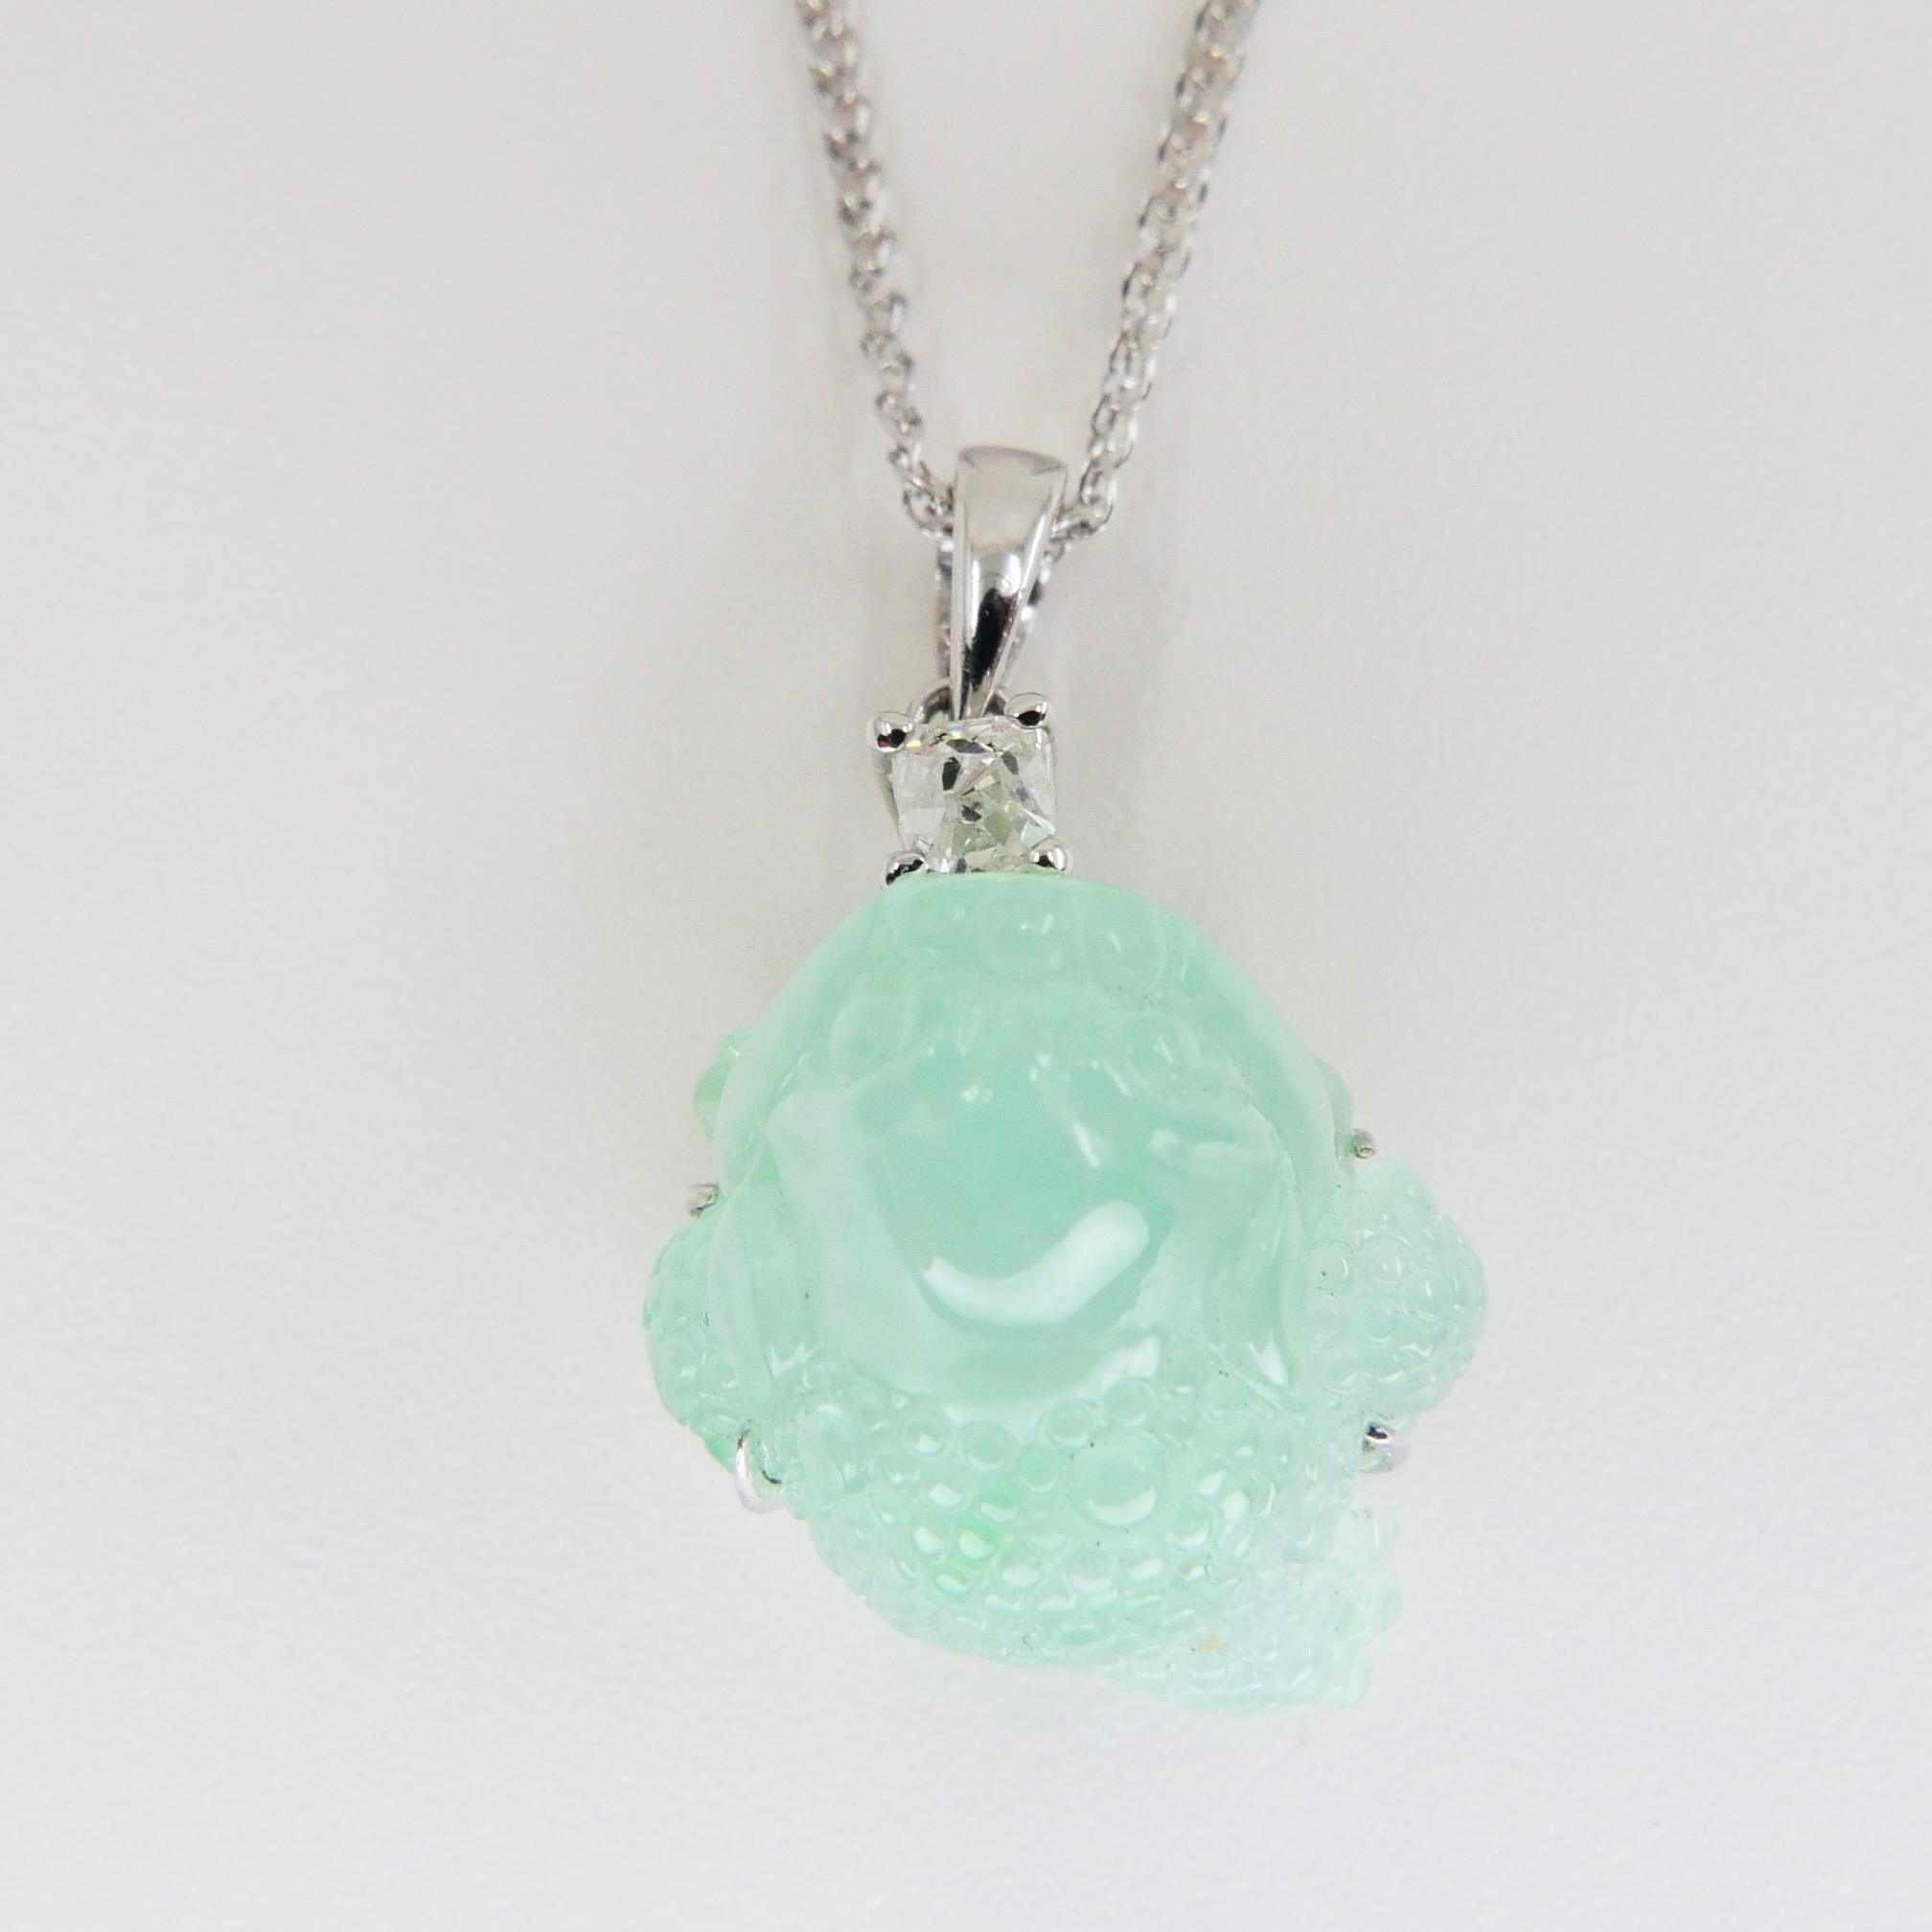 Certified Type A Jade Mythical Beast Drop Pendant Necklace, Icy Green 8